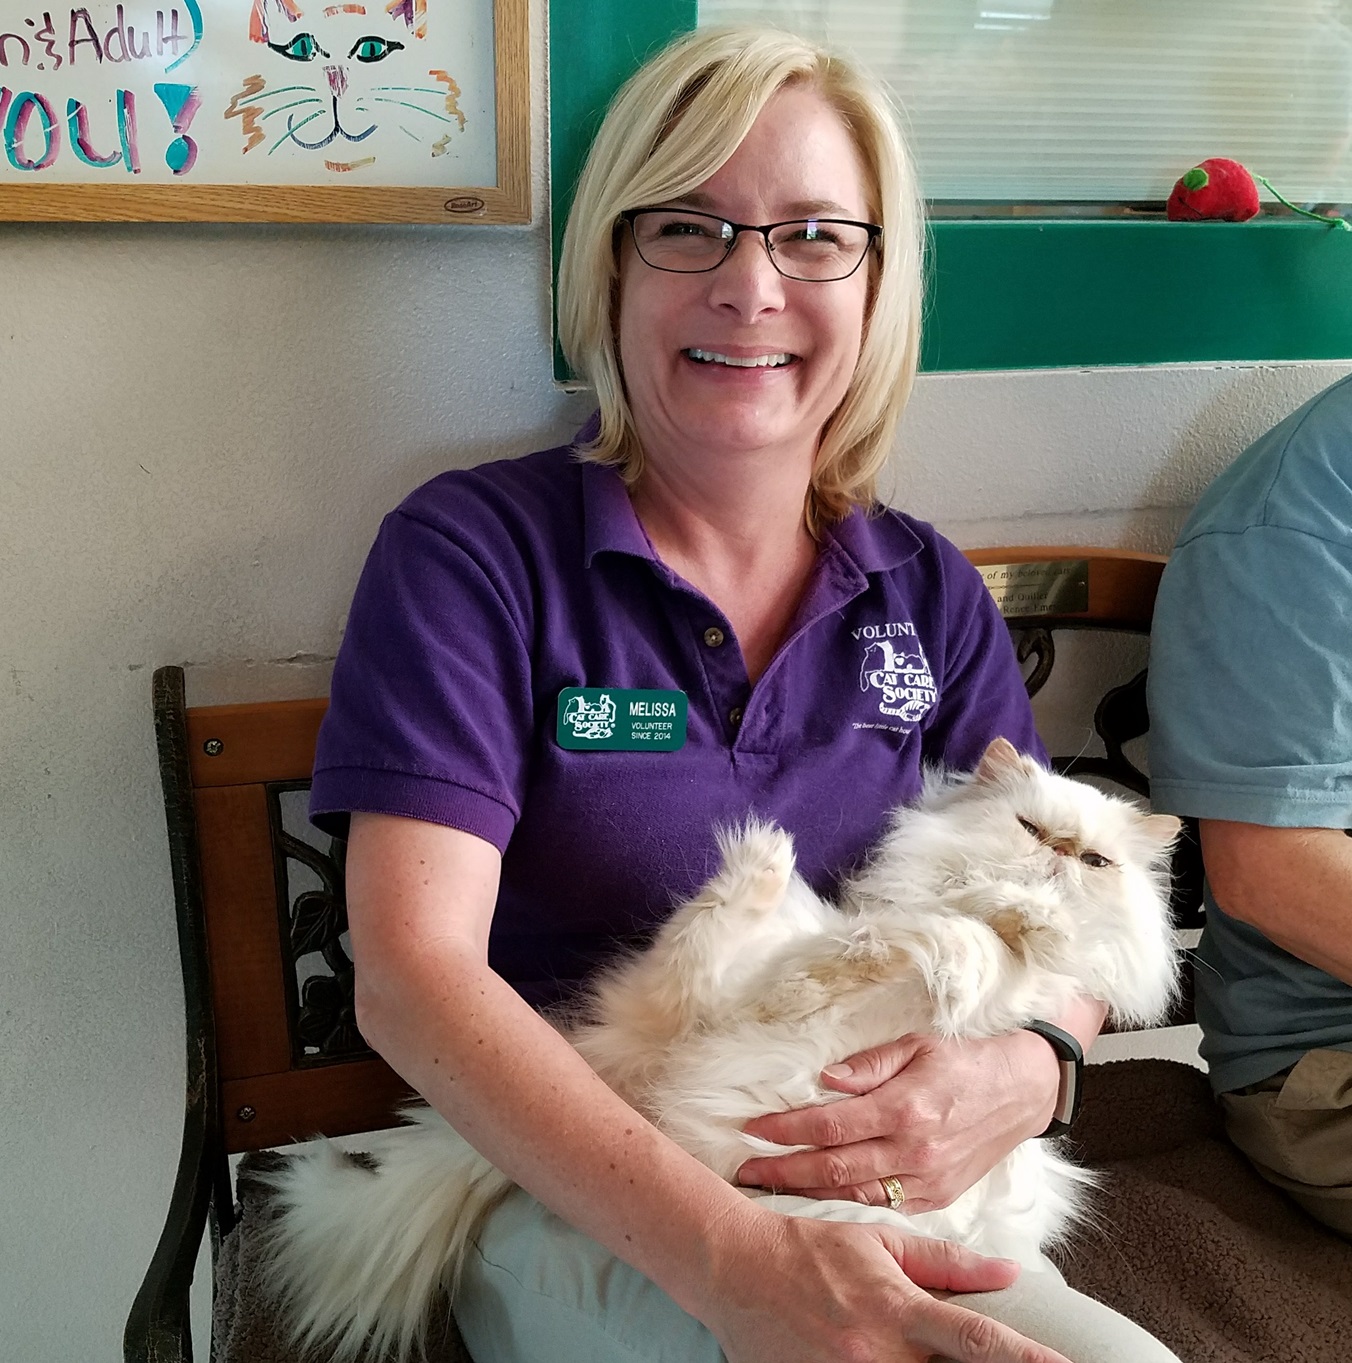 a woman in a purple shirt sits on a bench with a long-haired white cat in her lap on its back